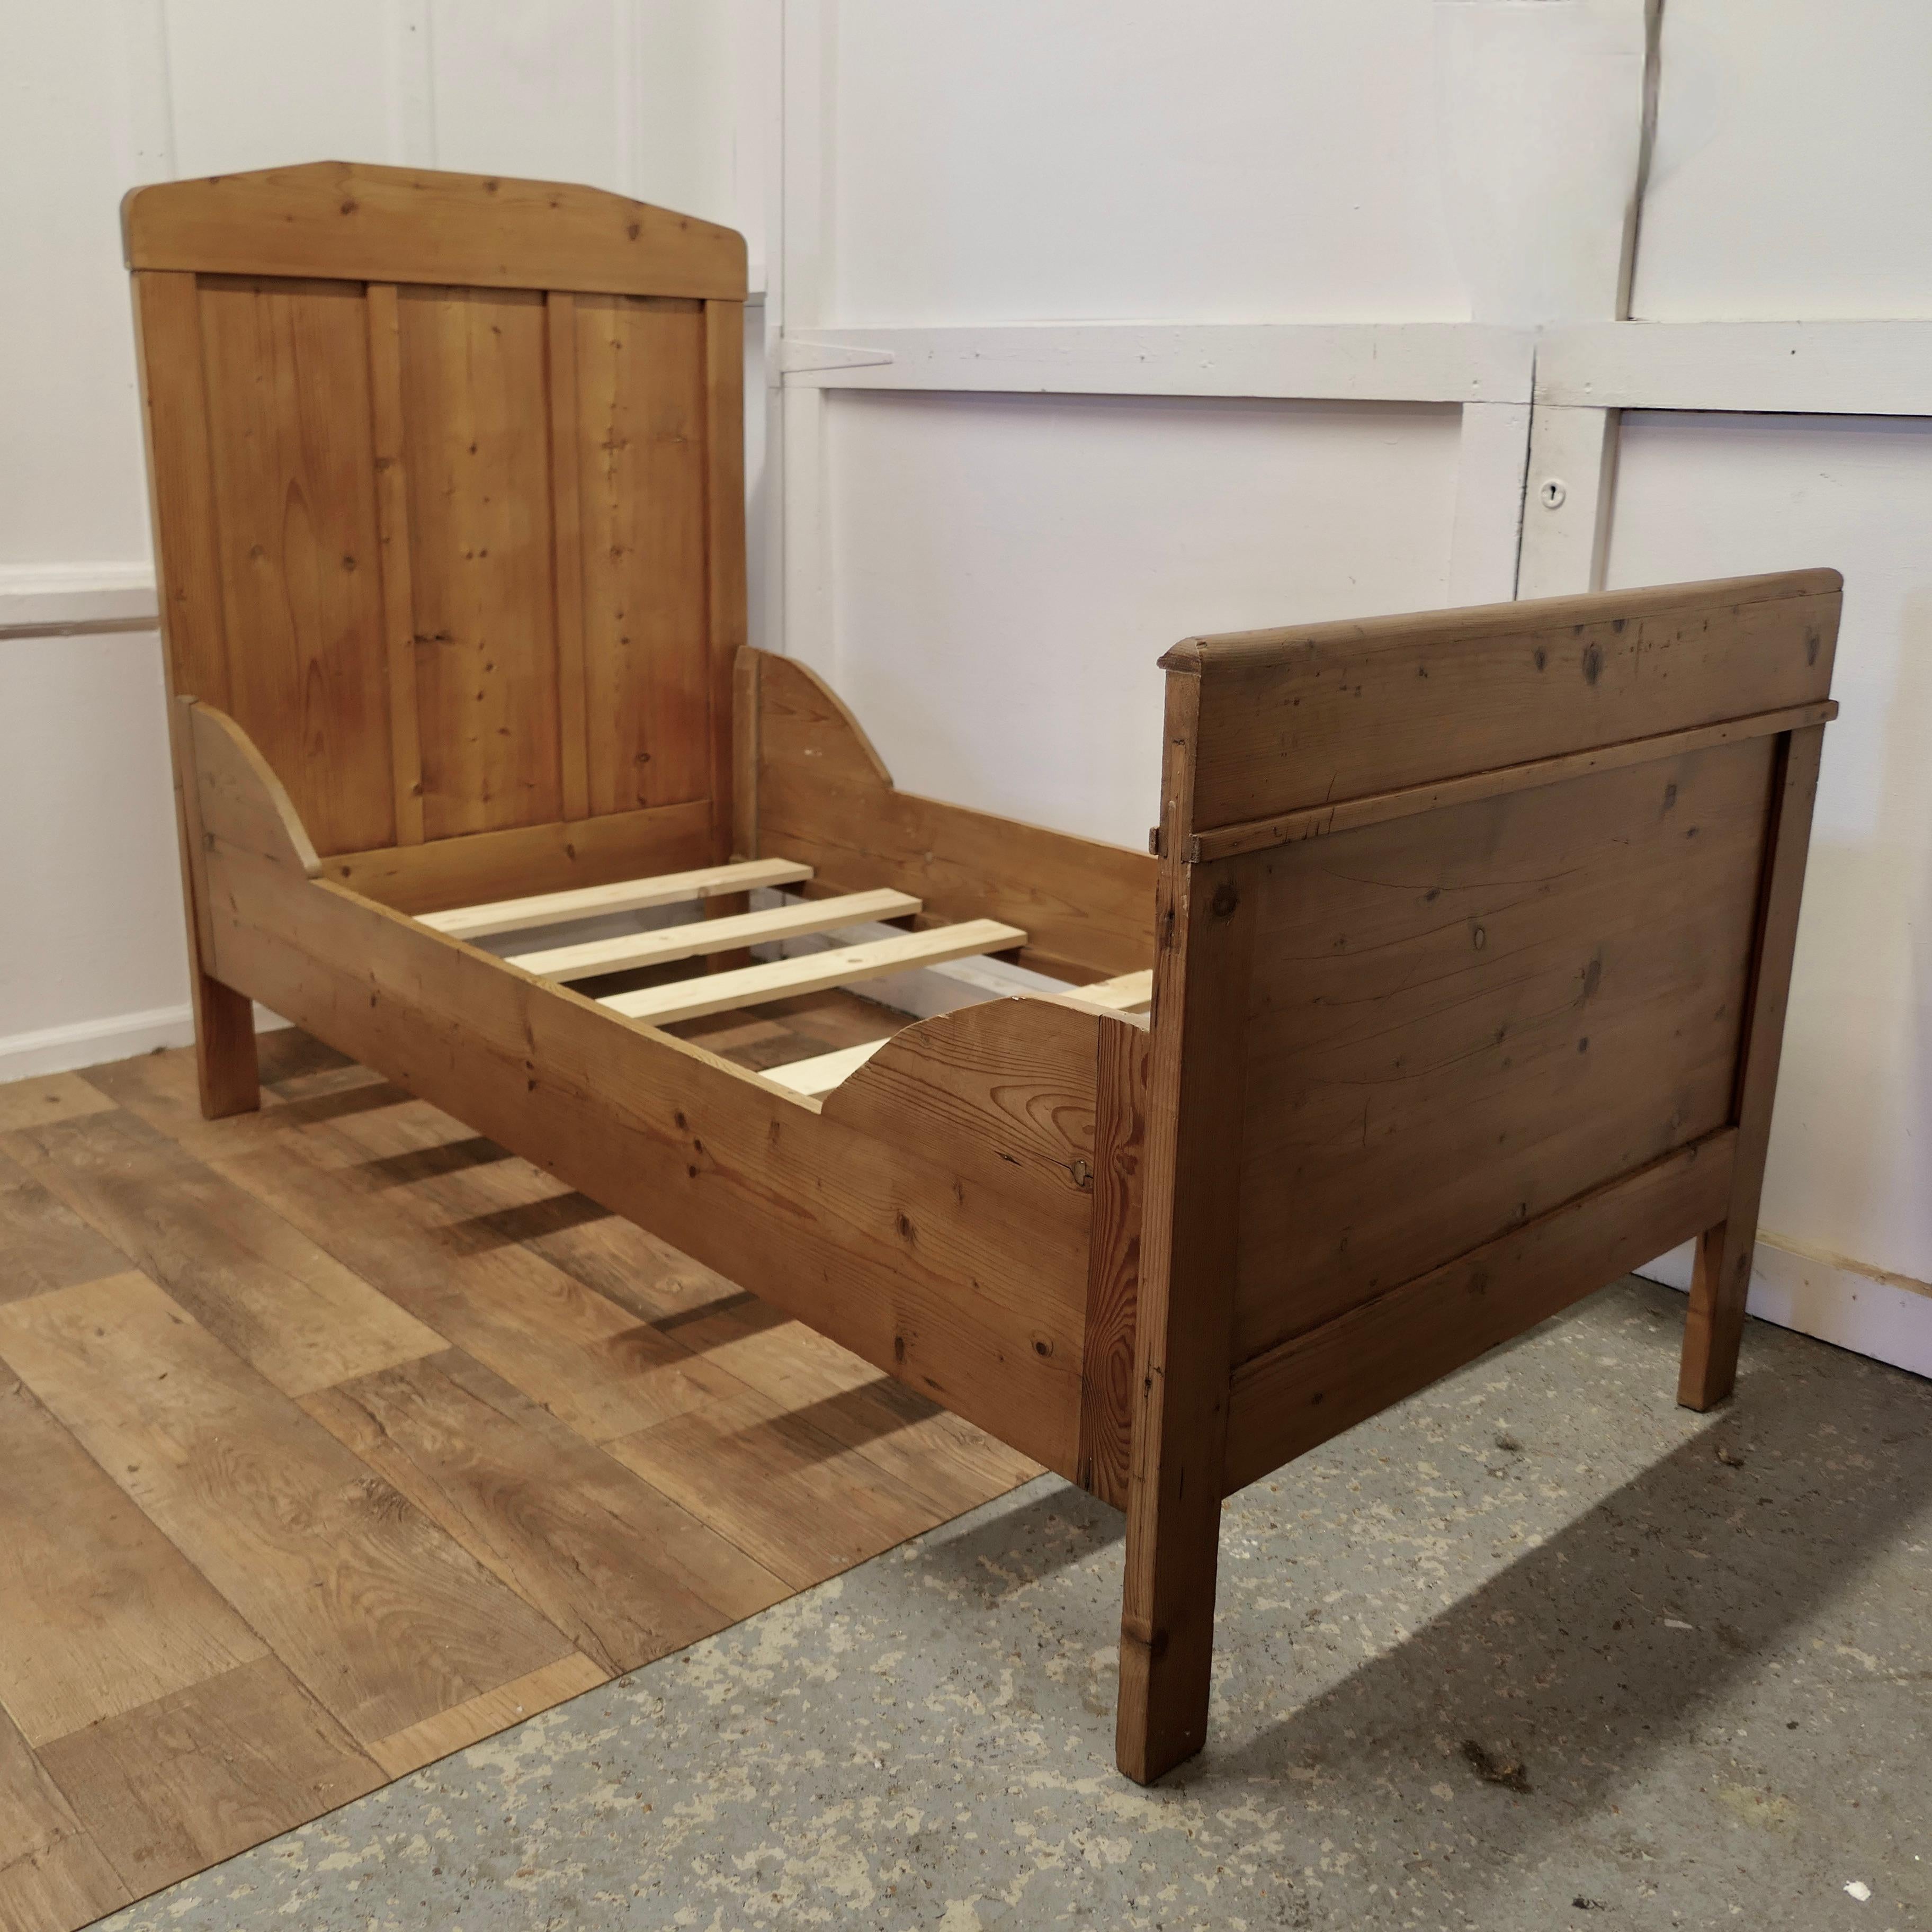 A 19th Century French Rustic Pine Single Sleigh Bed

This is a good solid piece of Pine Furniture, it is made from 1” thick pine it has 3 moulded panels at the head and a single broad panel at the foot
The sides are very attractively shaped and it